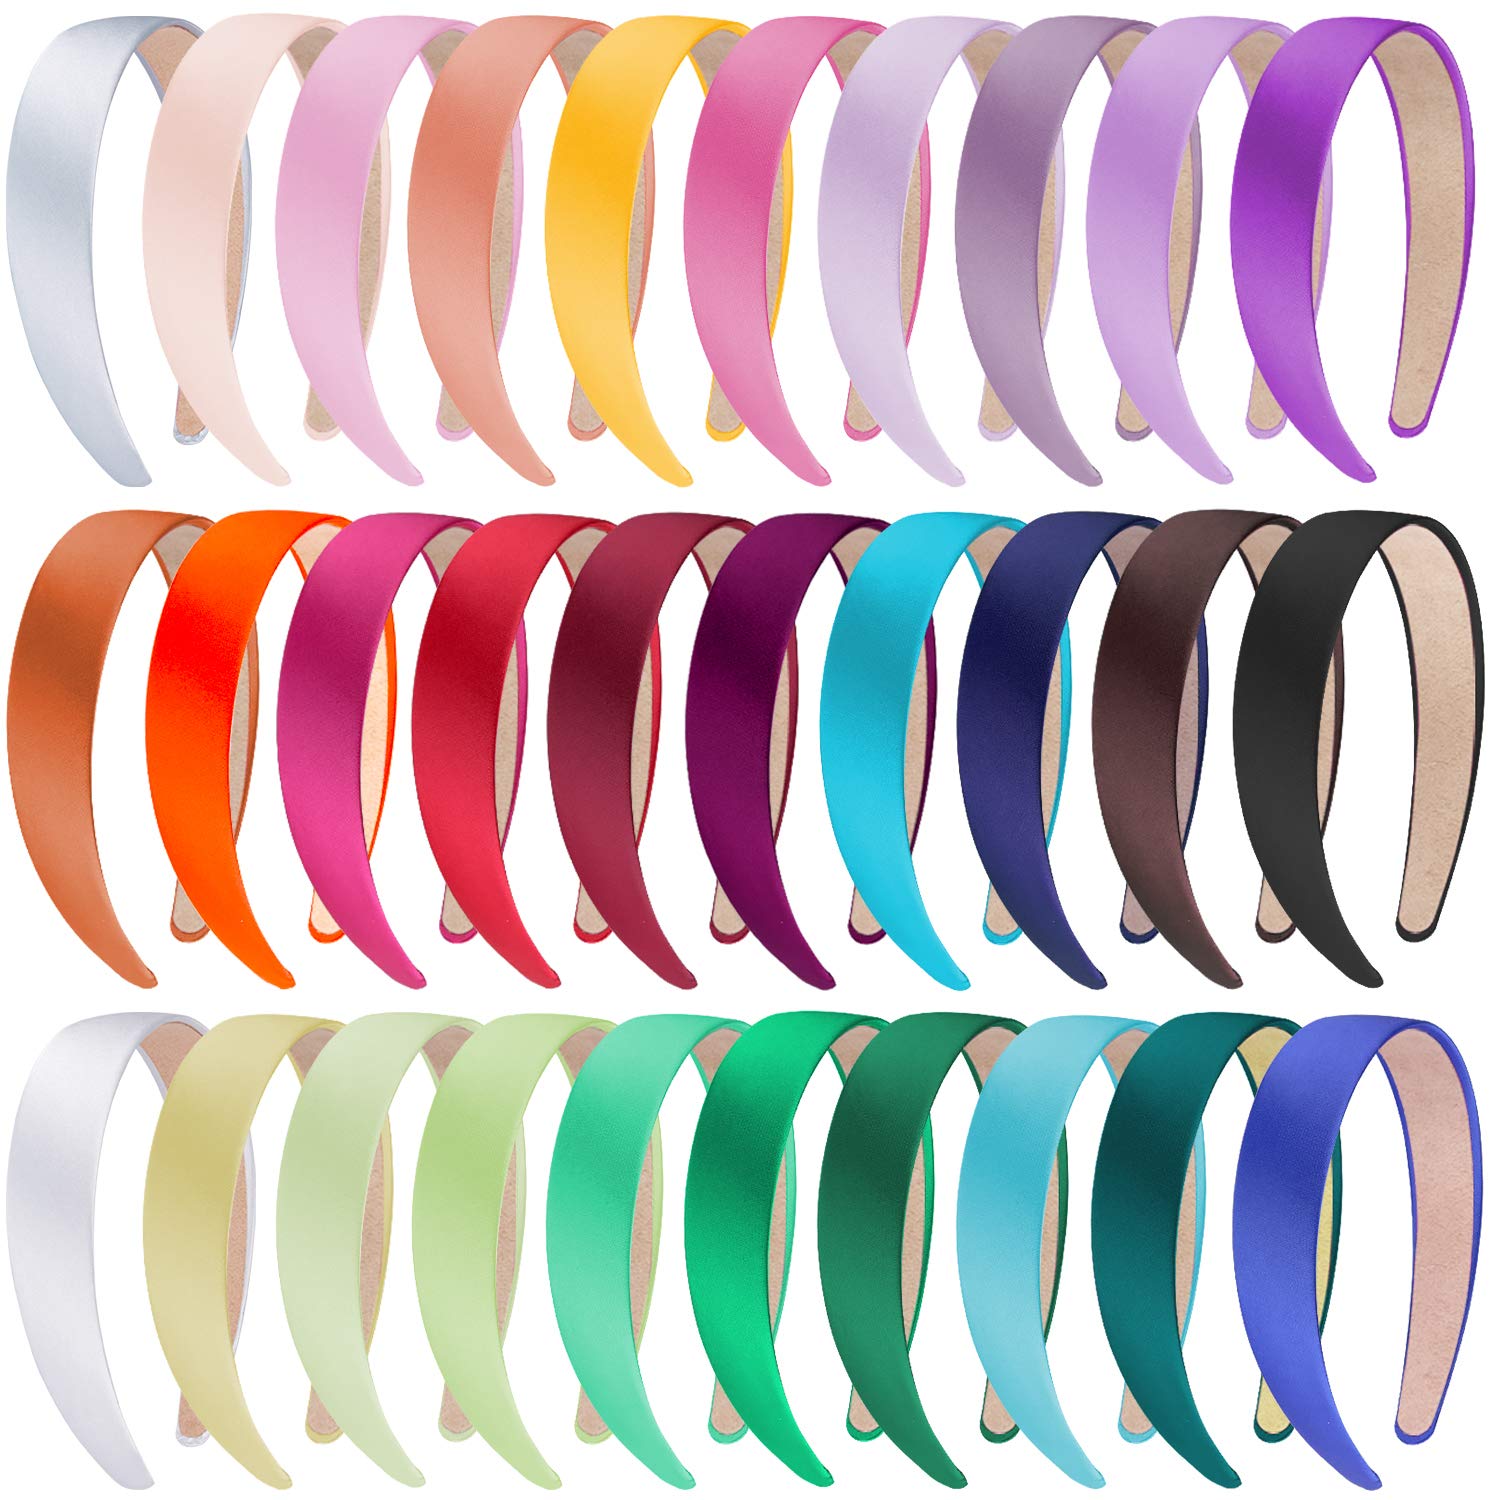 SIQUK 24 Pieces Satin Headbands 1 inch Wide Headband Colorful Non-Slip Headbands for Women and Girls, 24 Colors